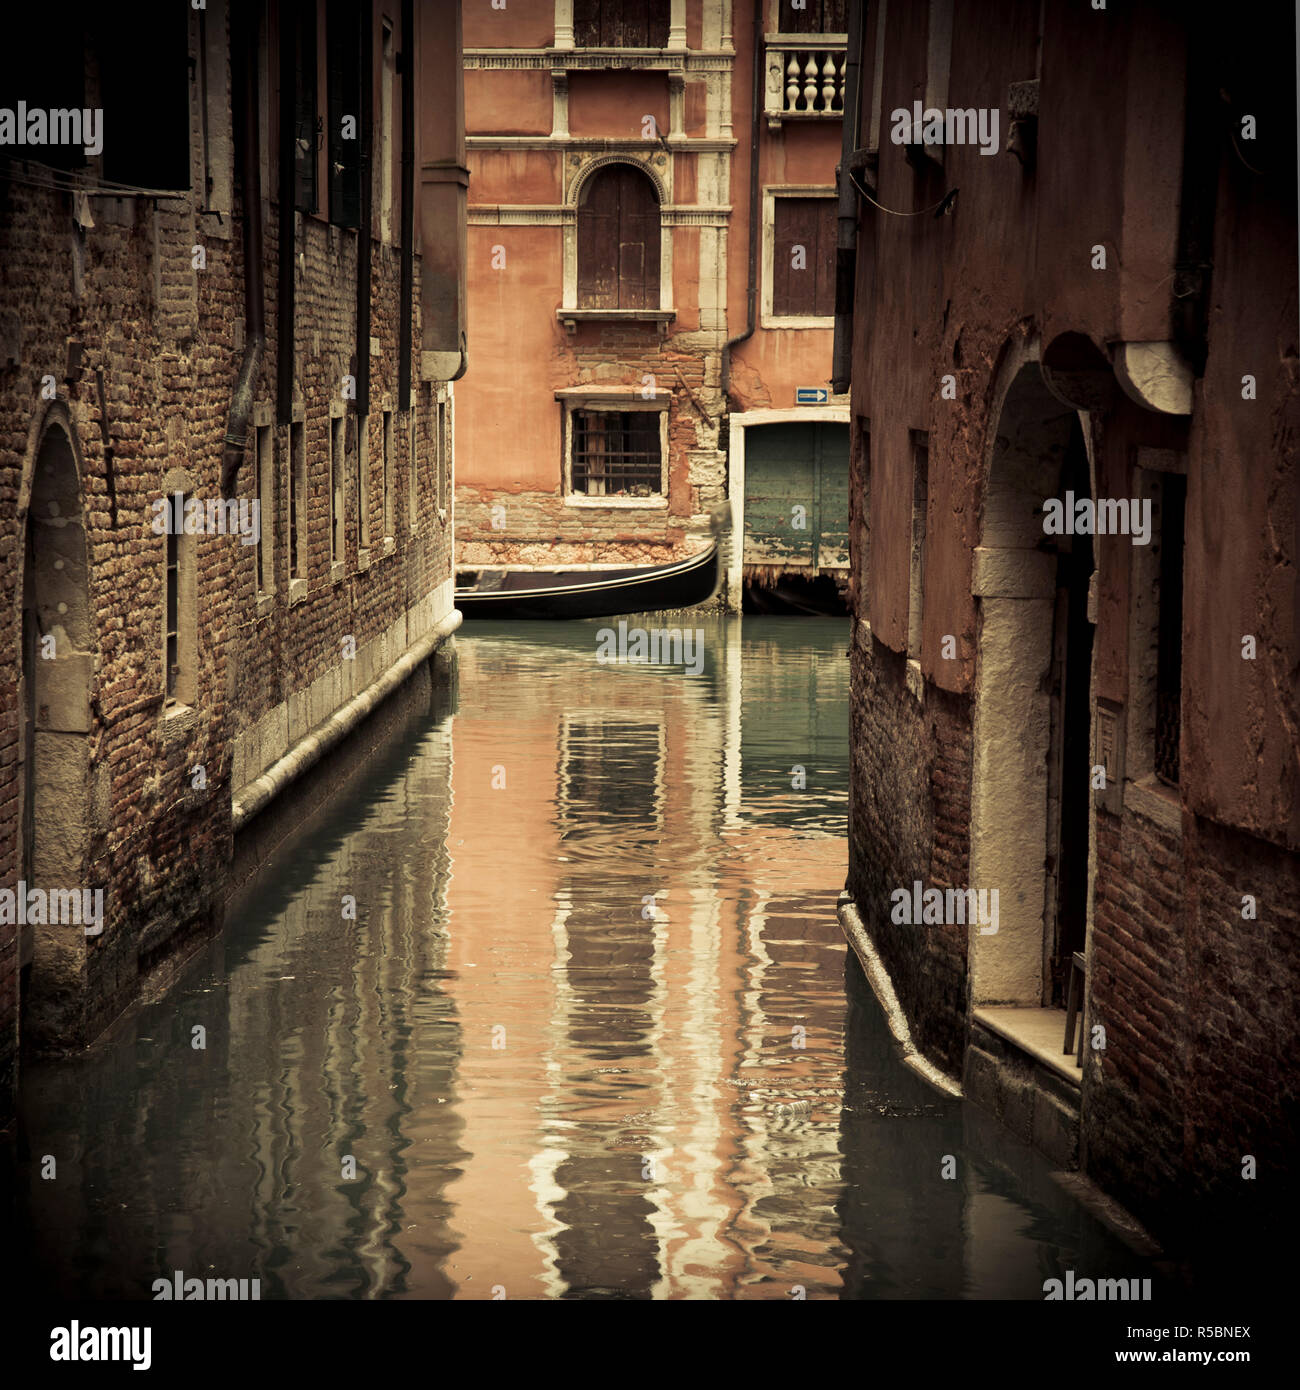 Canal in Venice, Italy Stock Photo